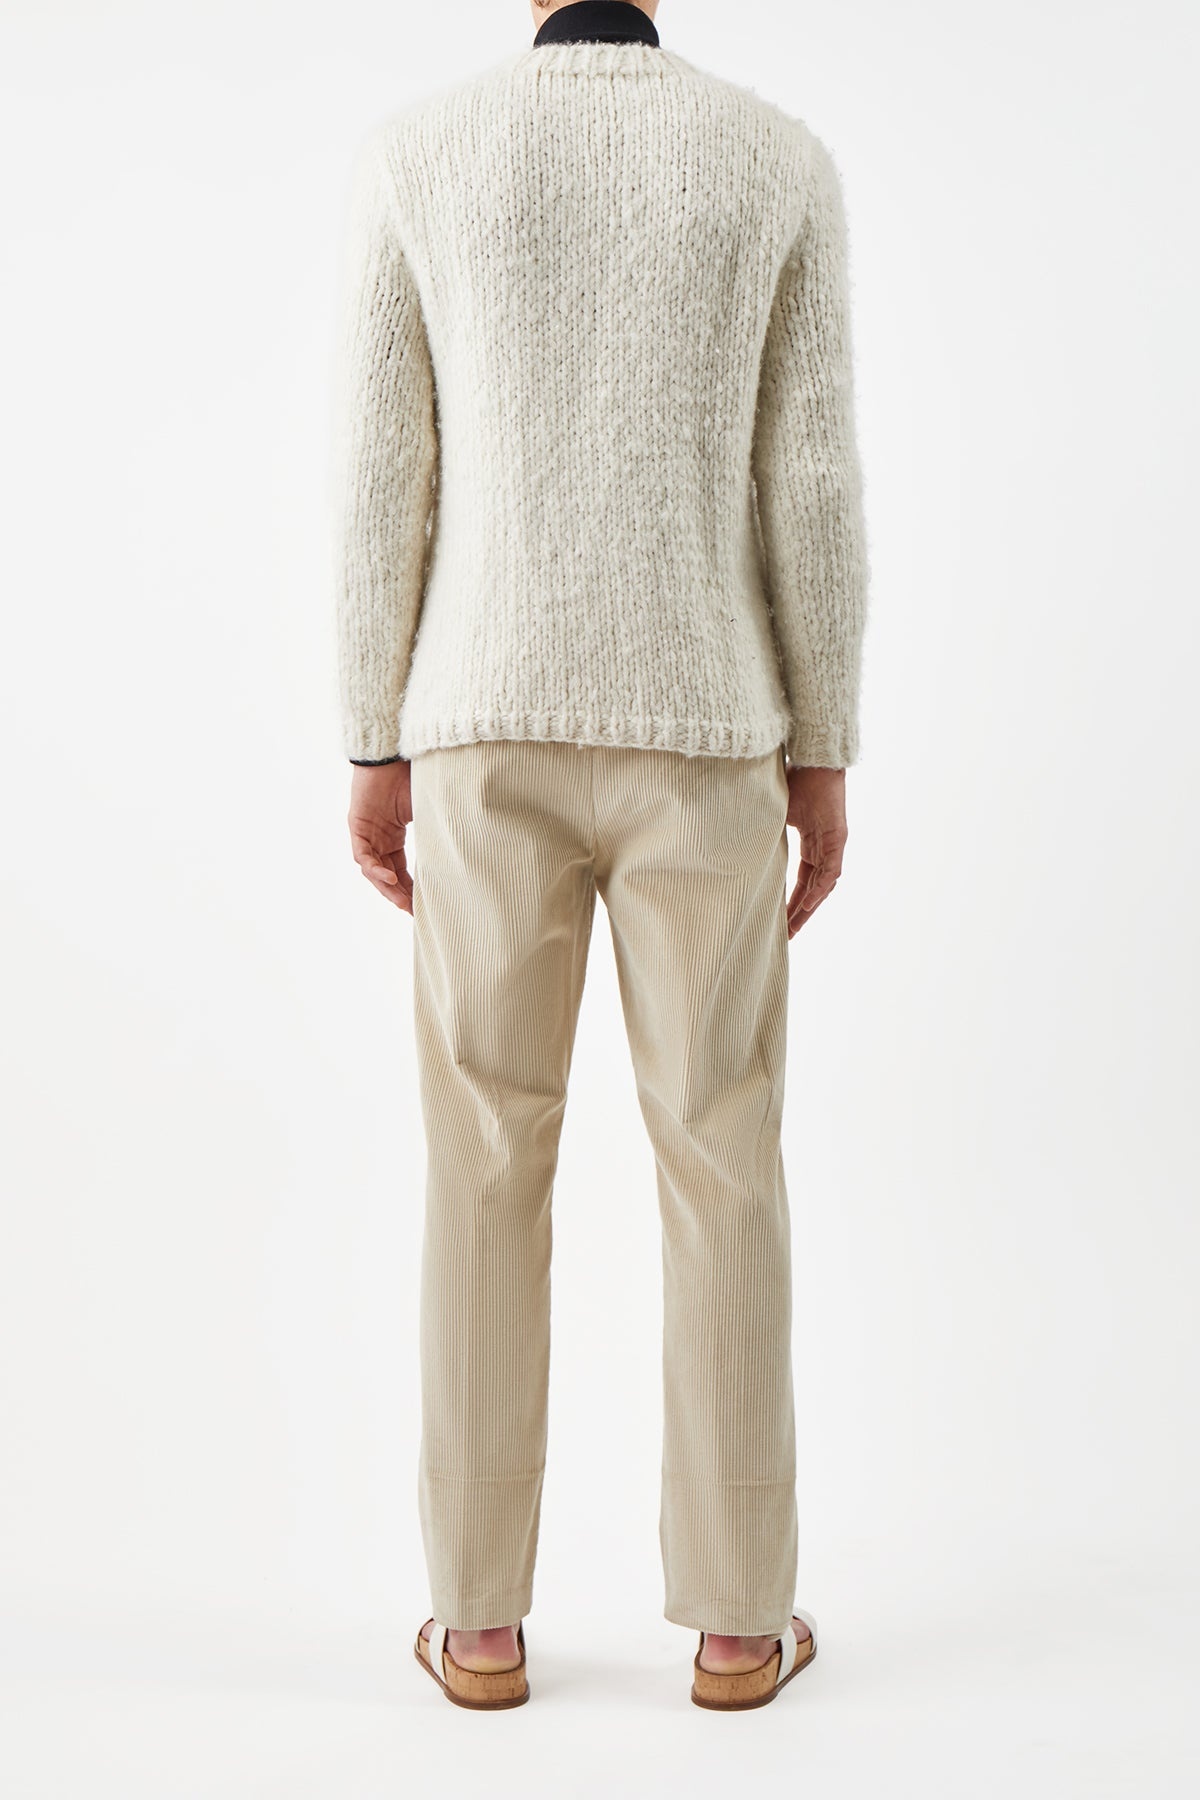 Lawrence Knit Sweater in Ivory Welfat Cashmere - 4